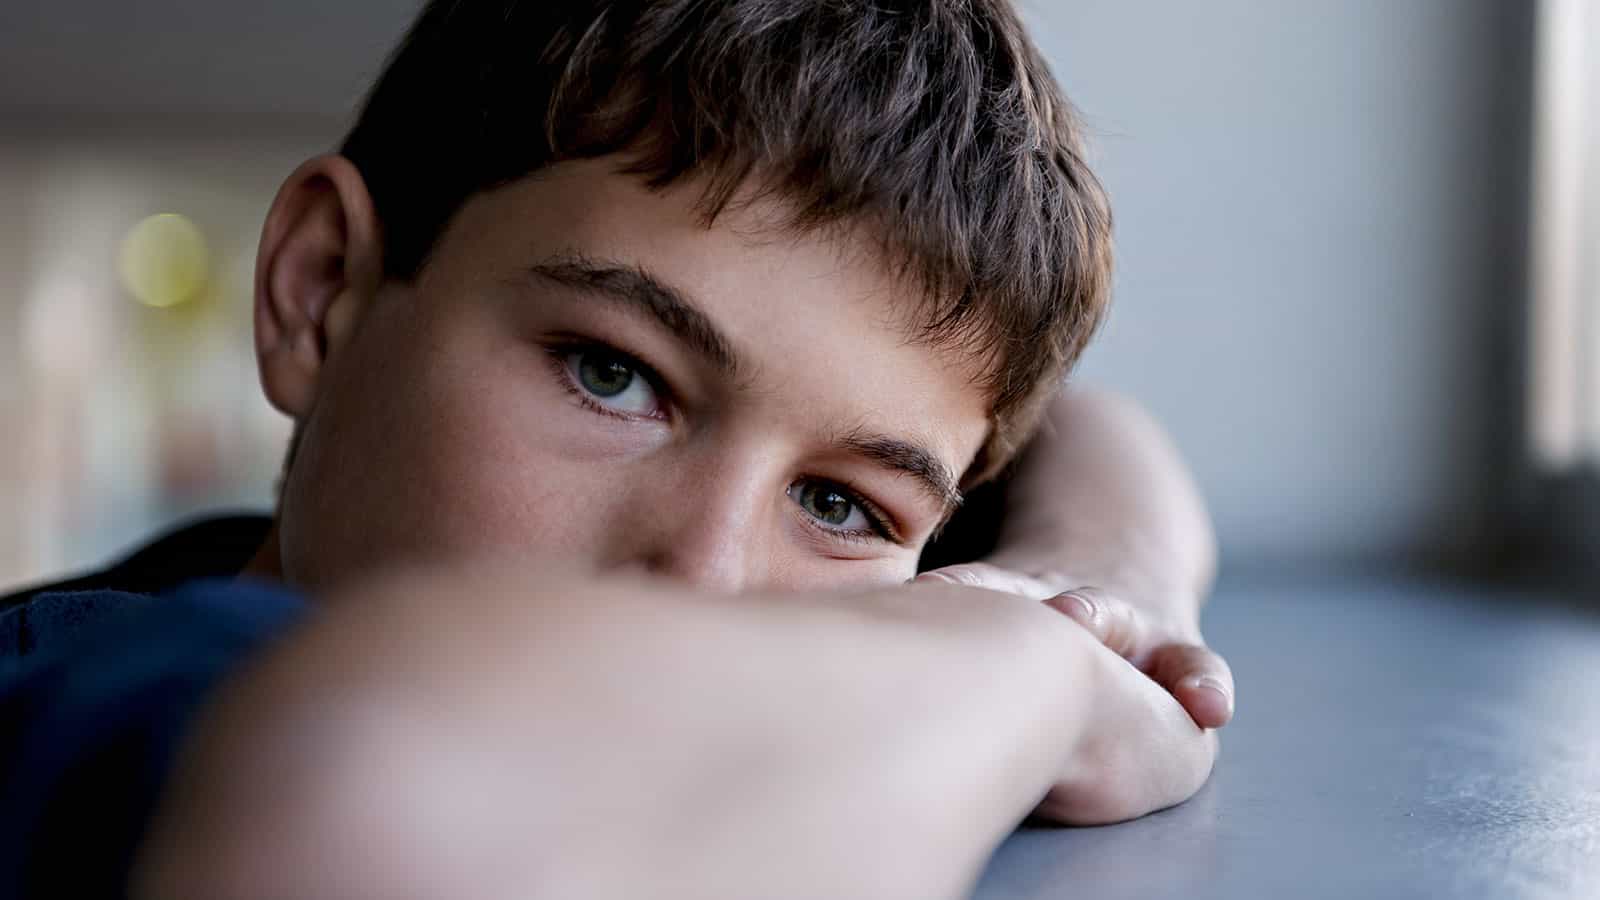 Signs of Autism Spectrum Disorder (ASD) that Every Parent Needs to Know